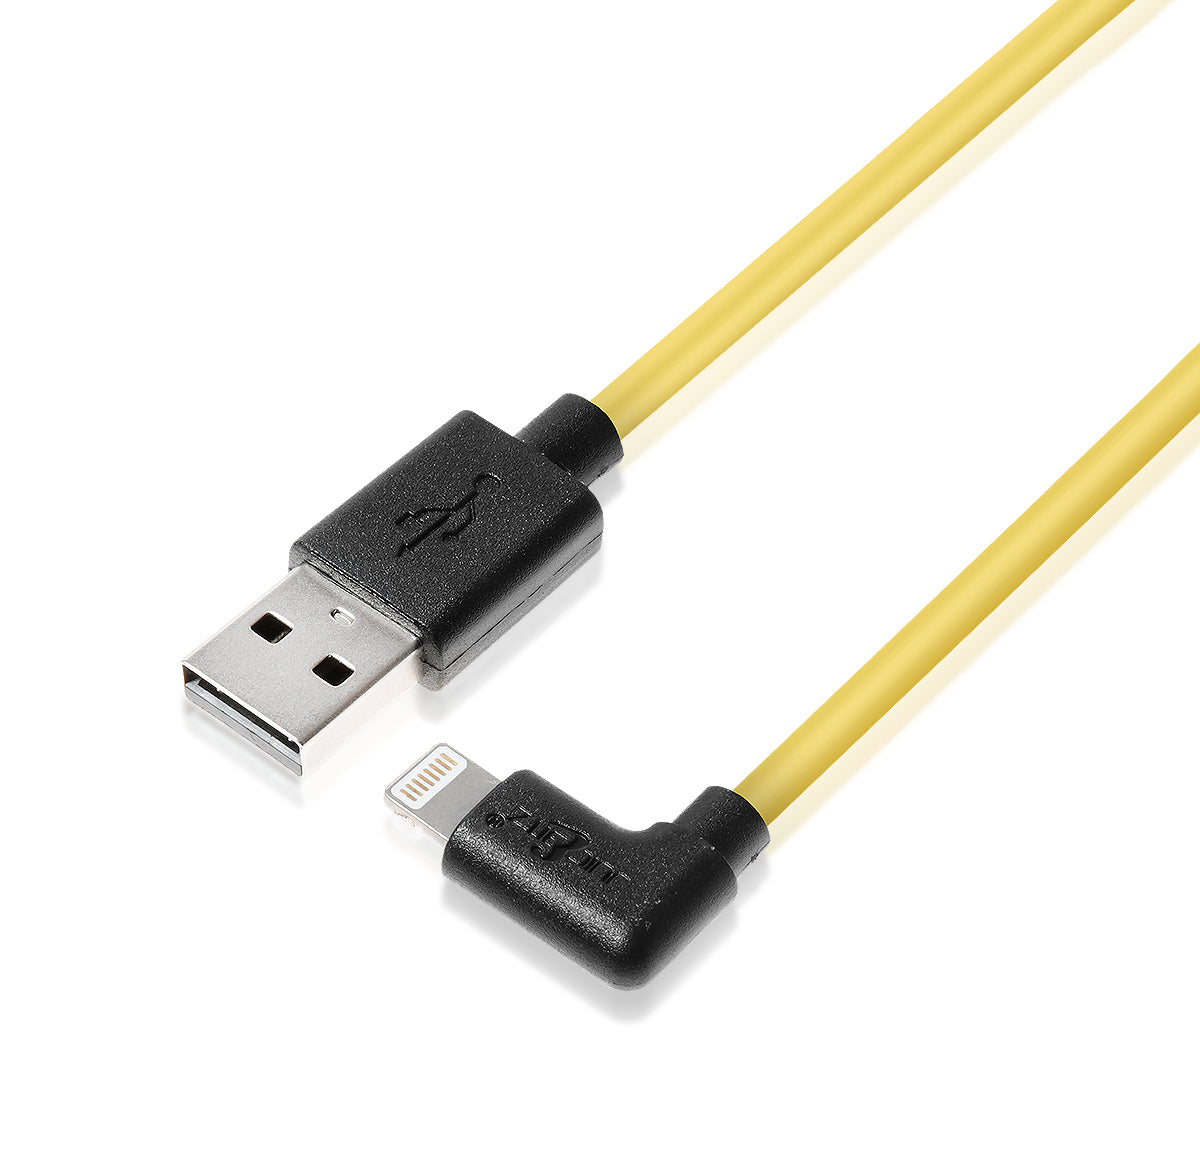 Heavy Duty Angled USB Charger Cable Data Sync Lead for iPhone, iPad, iPod - Yellow